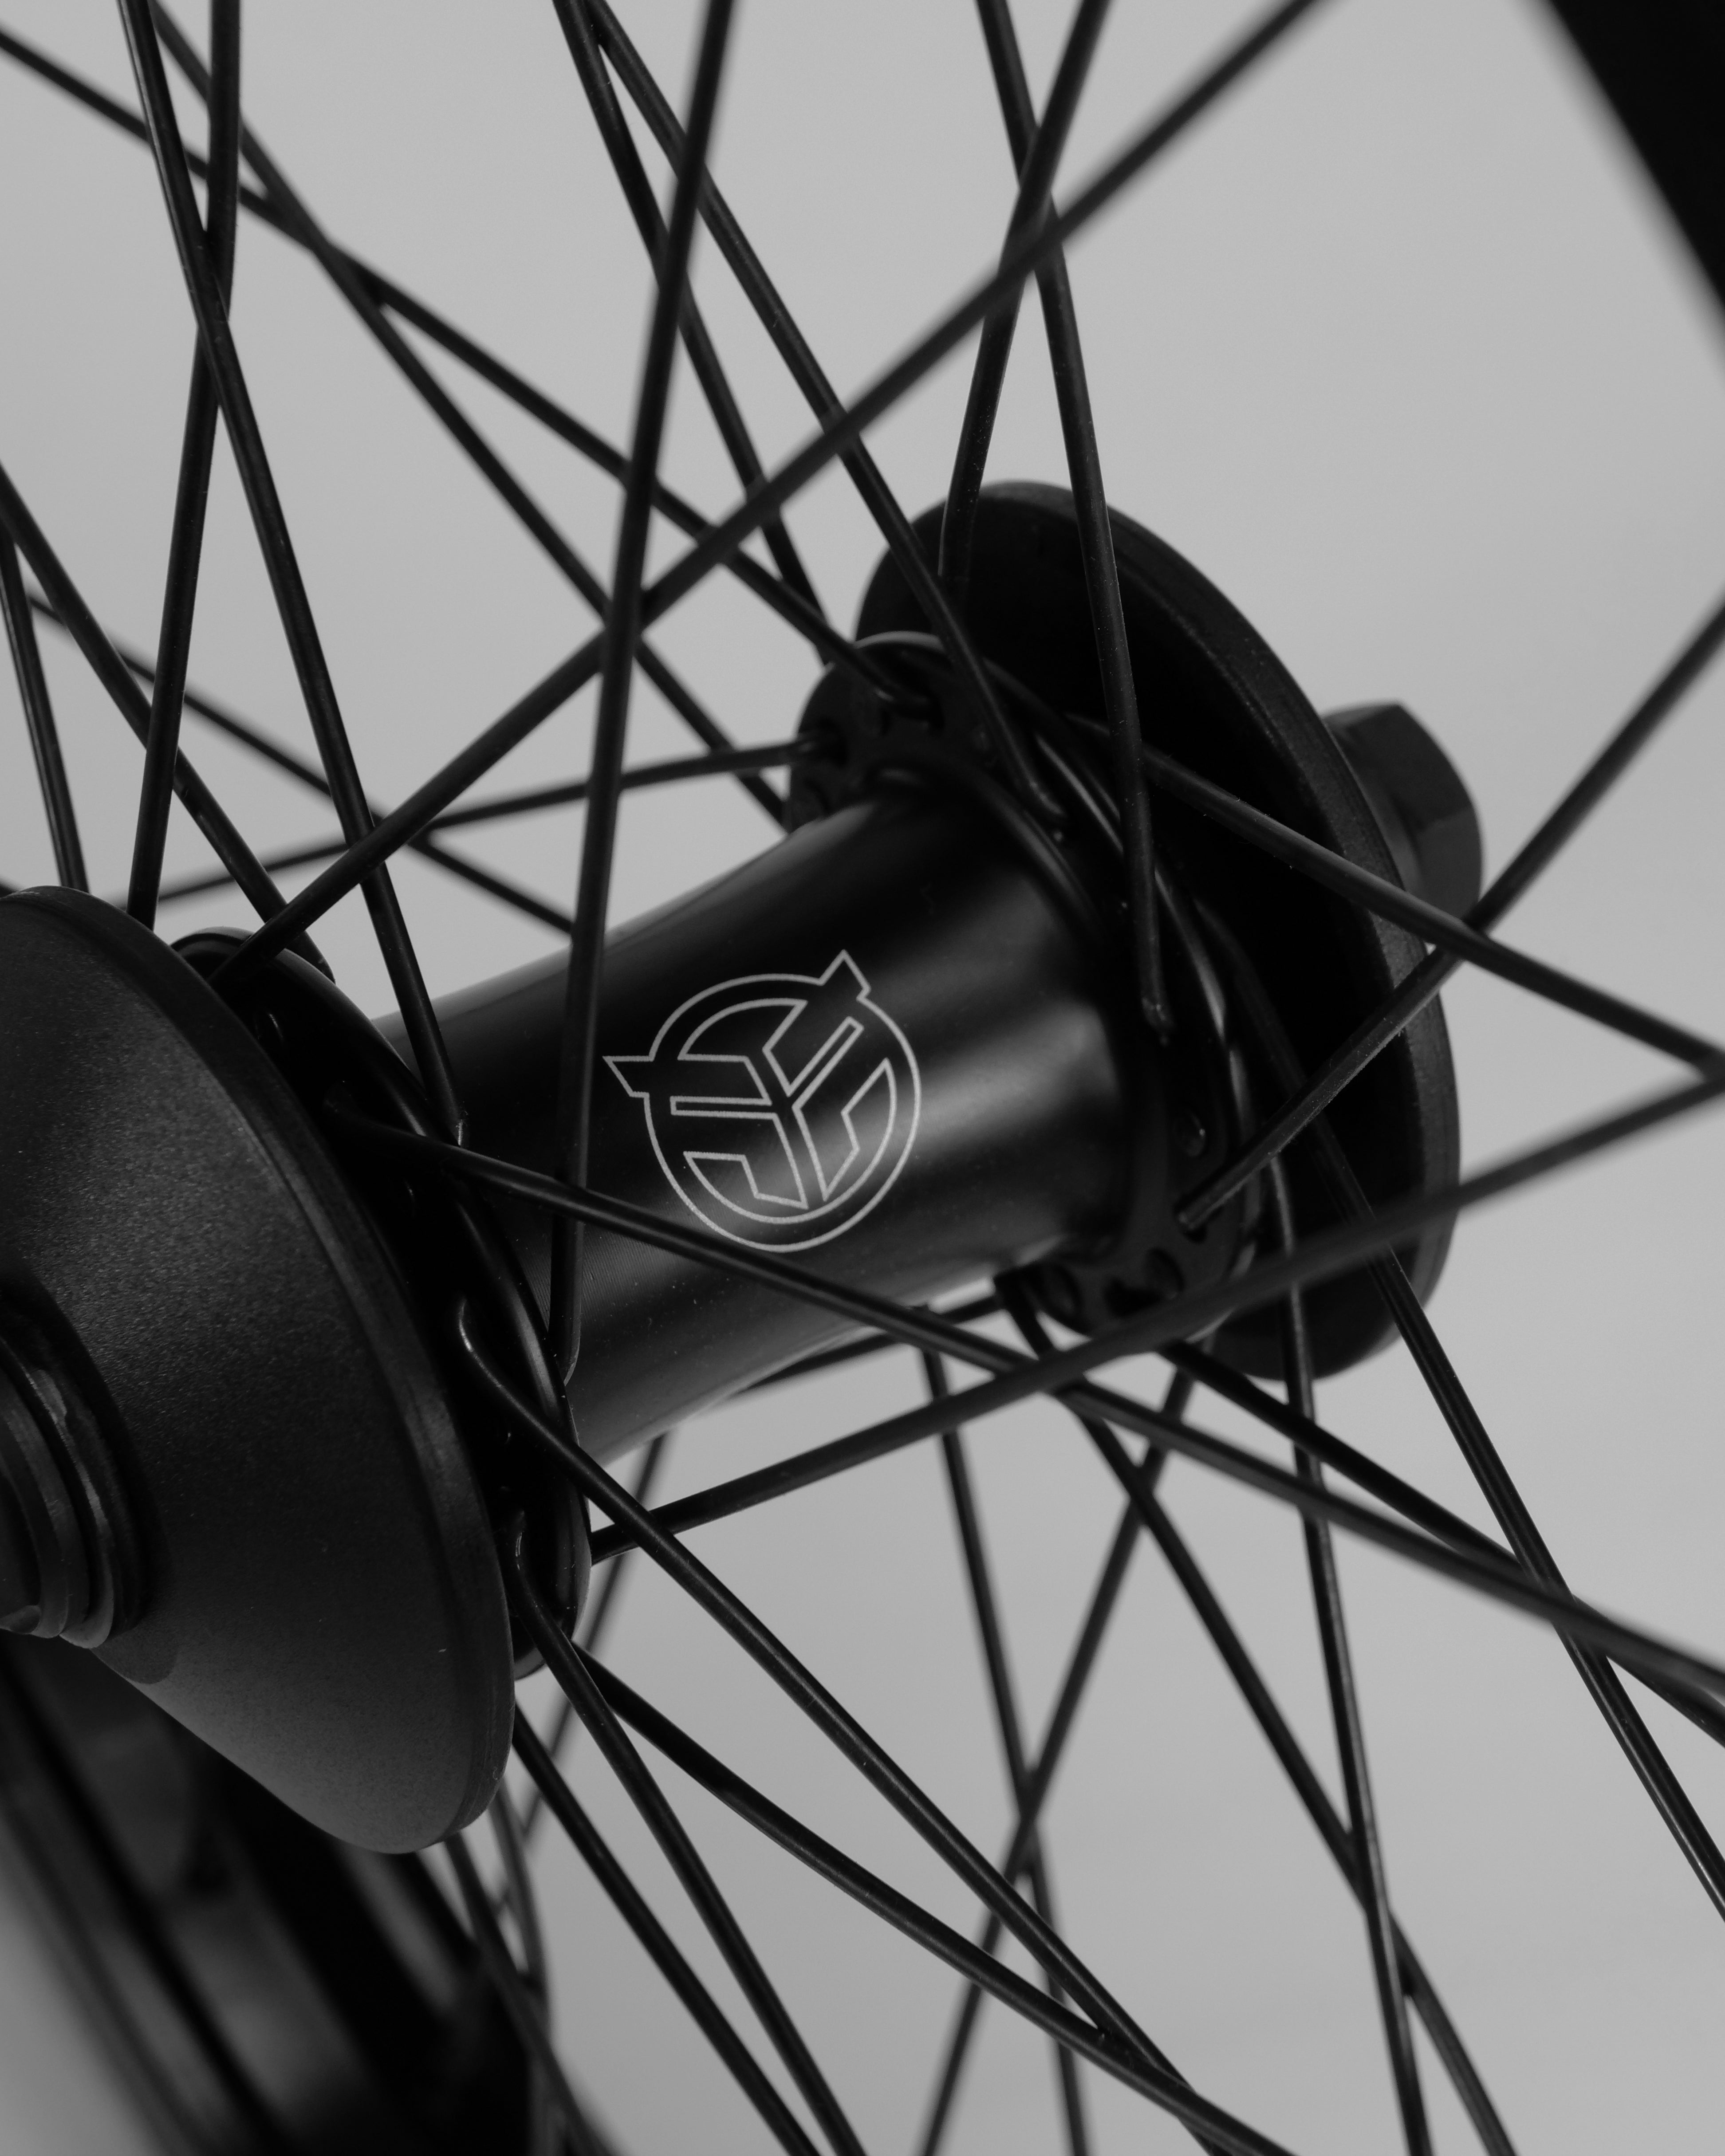 Close-up of a black bicycle wheel hub with intricate spokes, featuring a Federal Stance Pro x Alienation 18 Custom Wheelset logo.